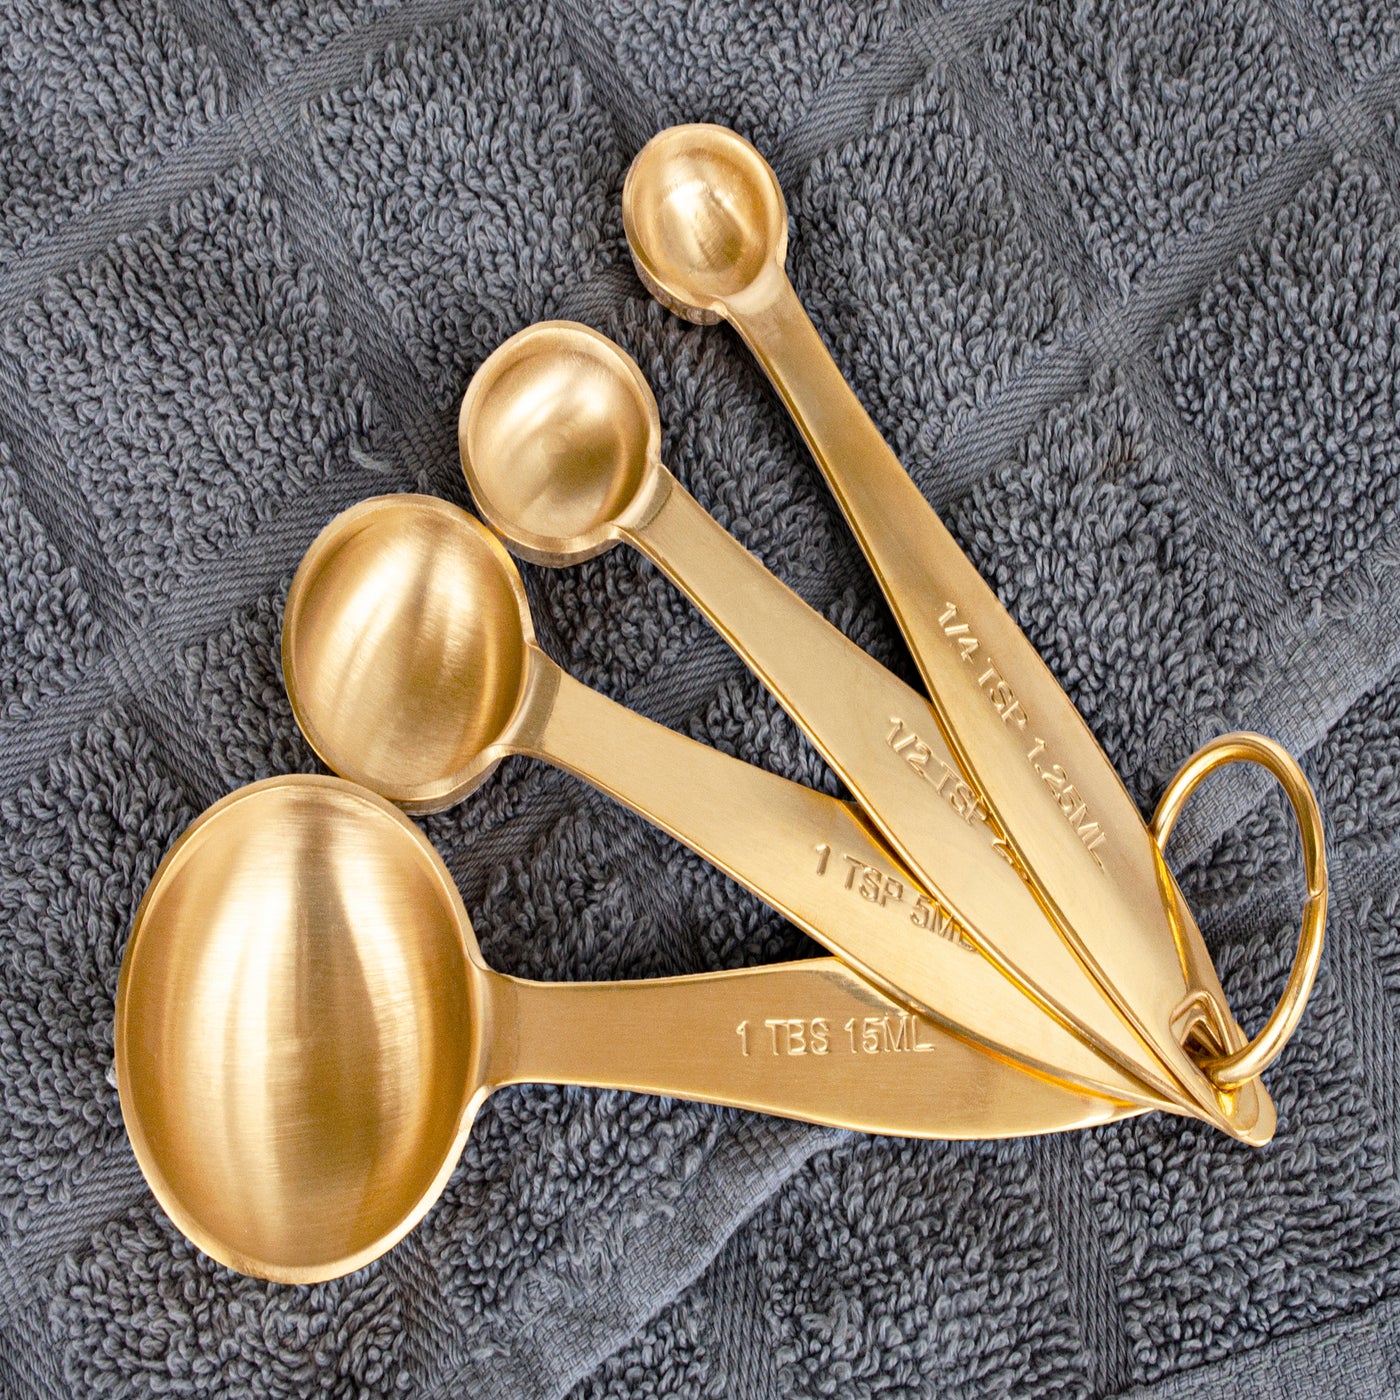 4-1/2L Stainless Steel Measuring Spoons, Gold Finish, Set of 4